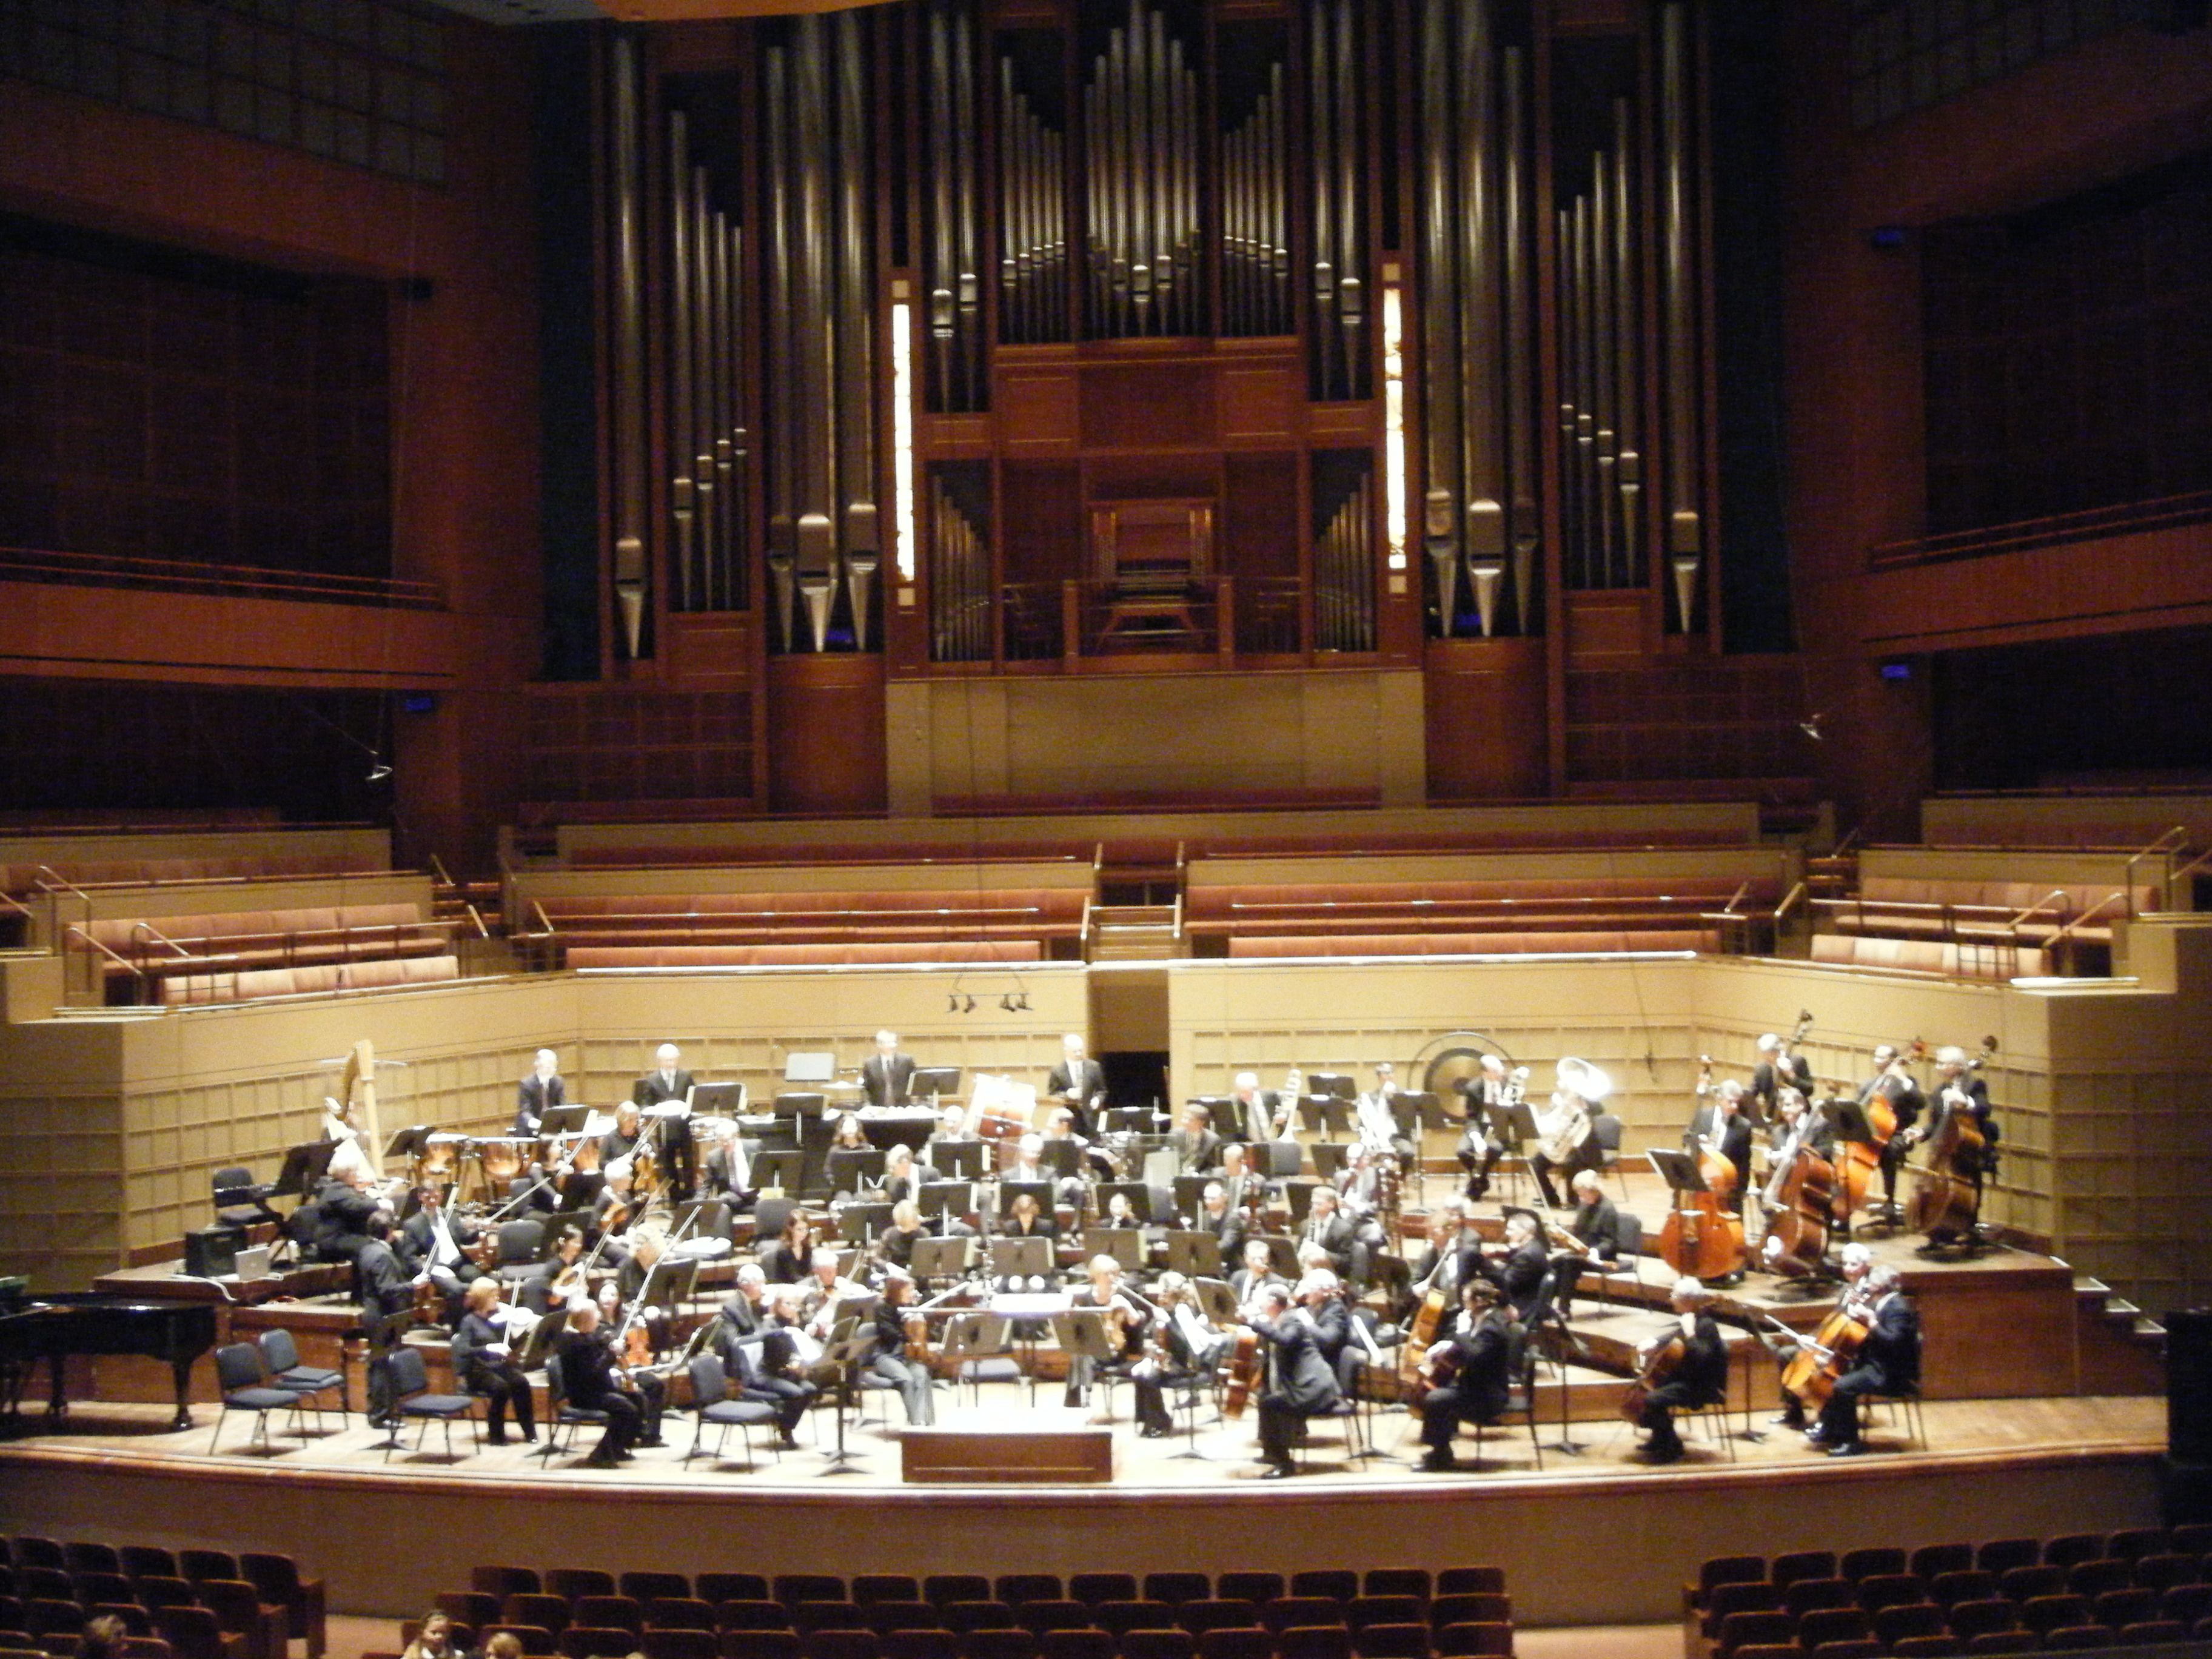 Dallas Symphony Orchestra Seating Chart